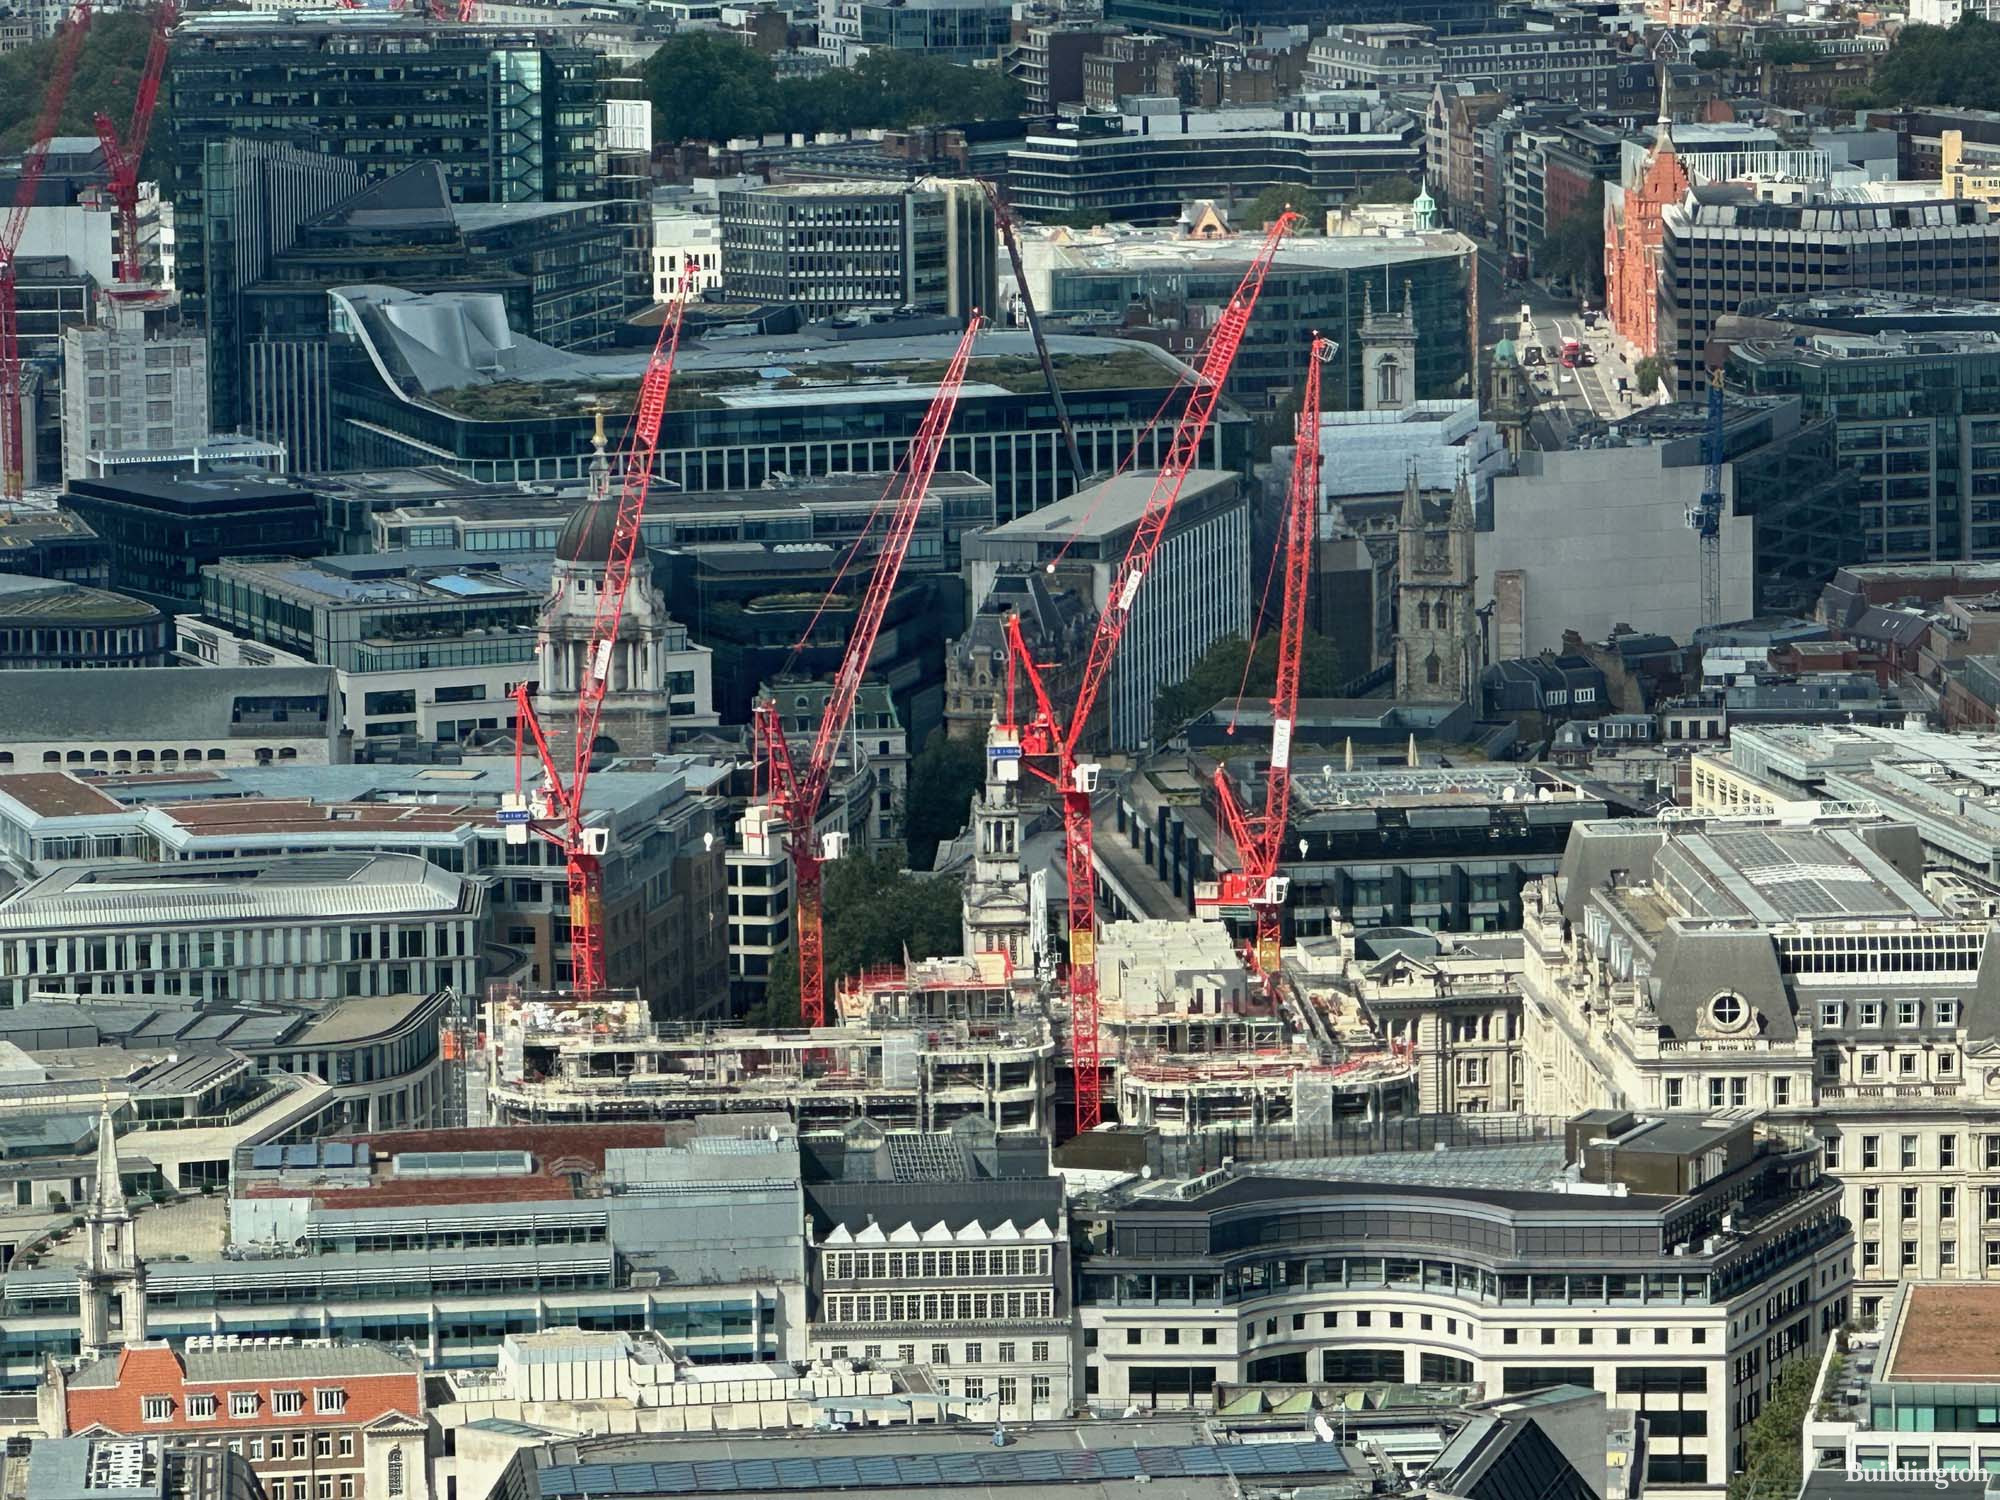 Panorama St Paul’s development under construction seen from The Lookout viewing gallery at 8 Bishopsgate in the City of London EC4.